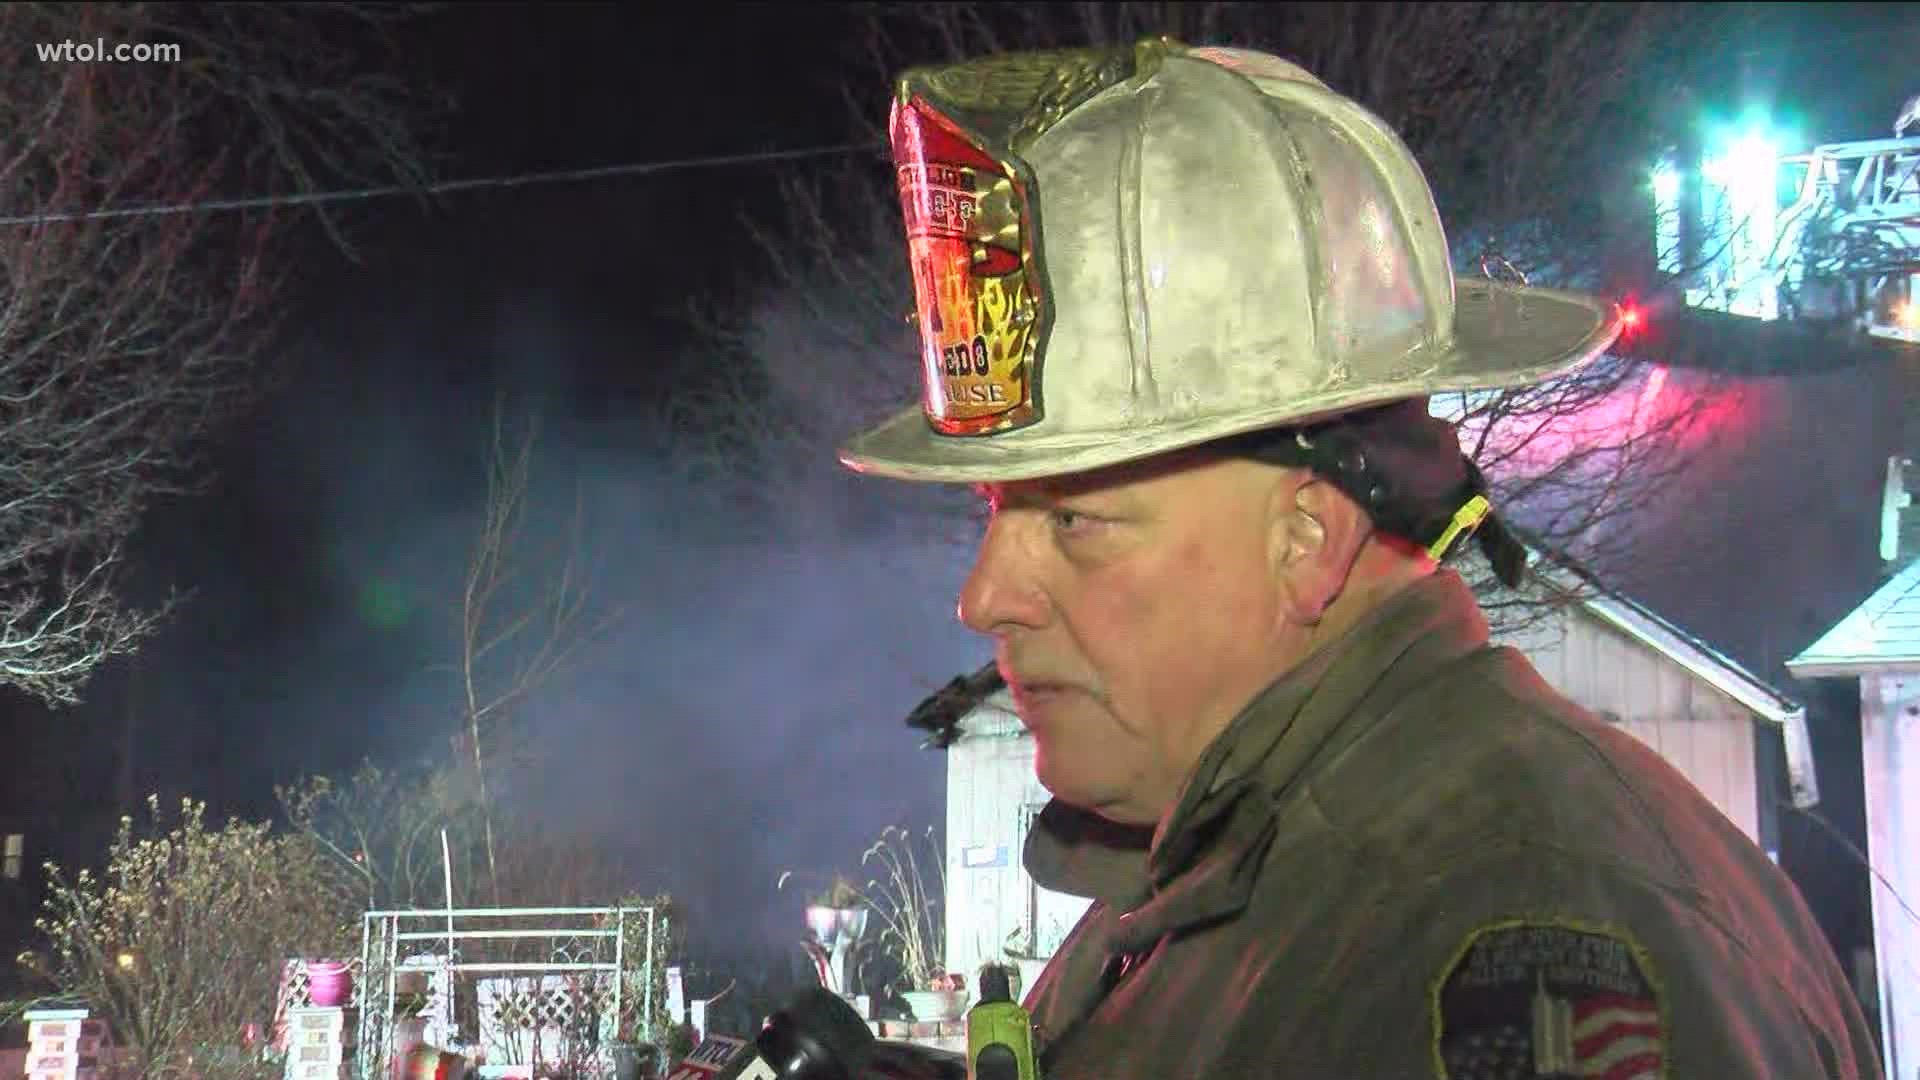 Crews responded to an early Wednesday morning call, the fire spread between two houses on Vinton Street.